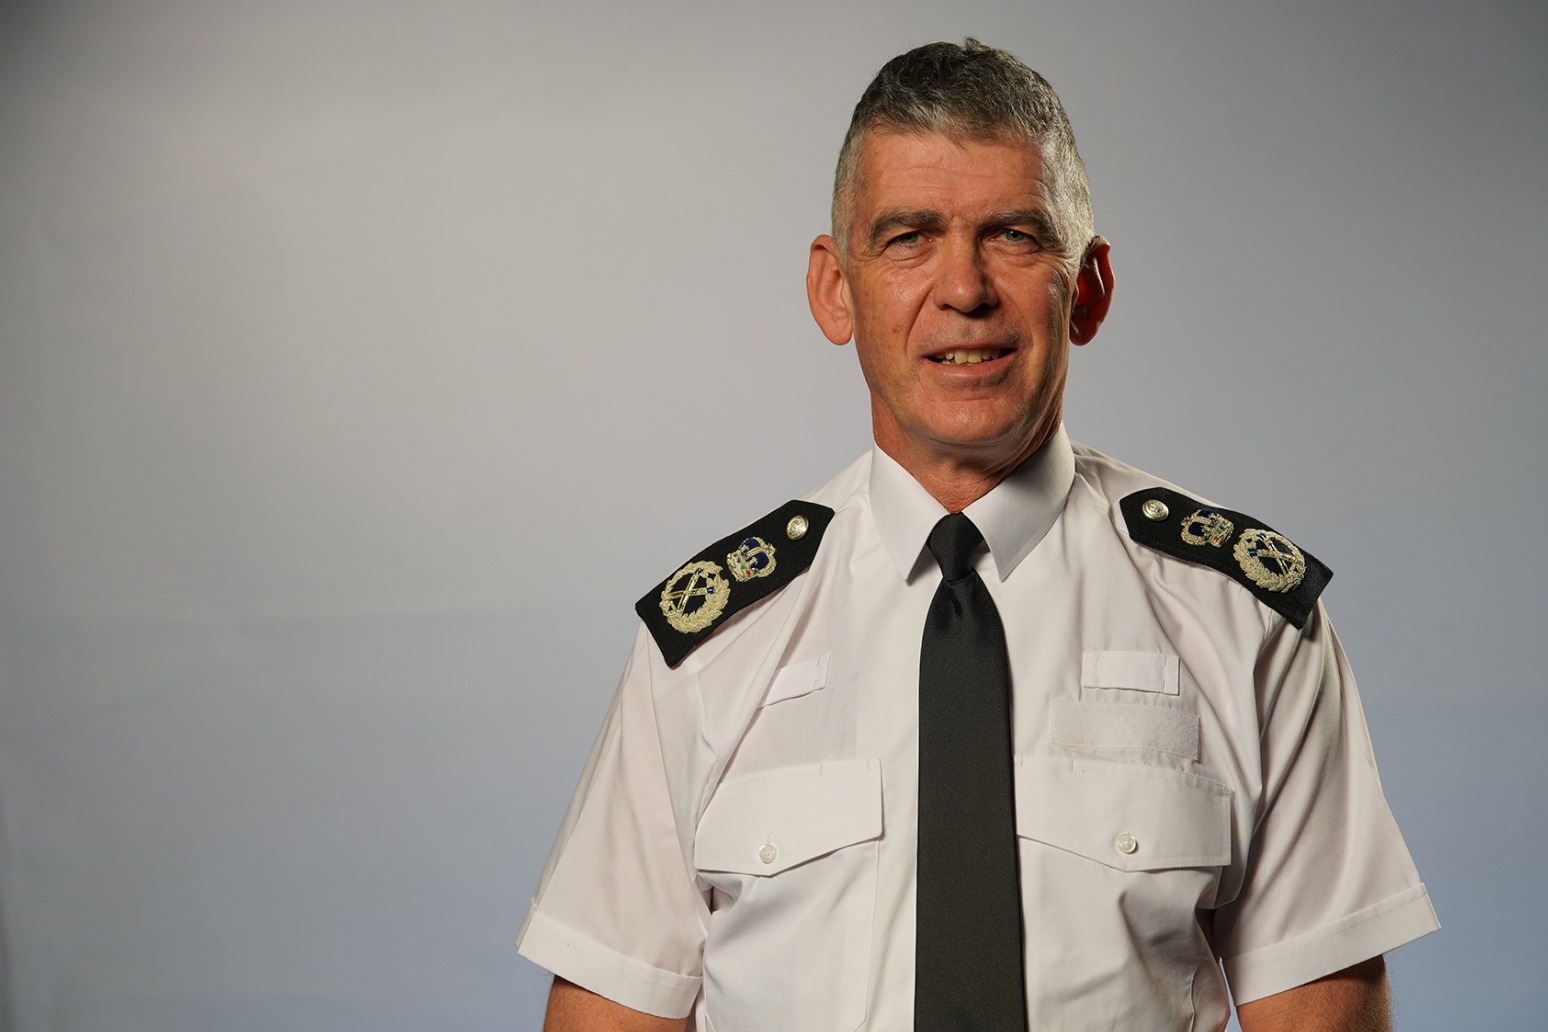 Standards chief to call on police to ‘exercise highest professional standards’ 